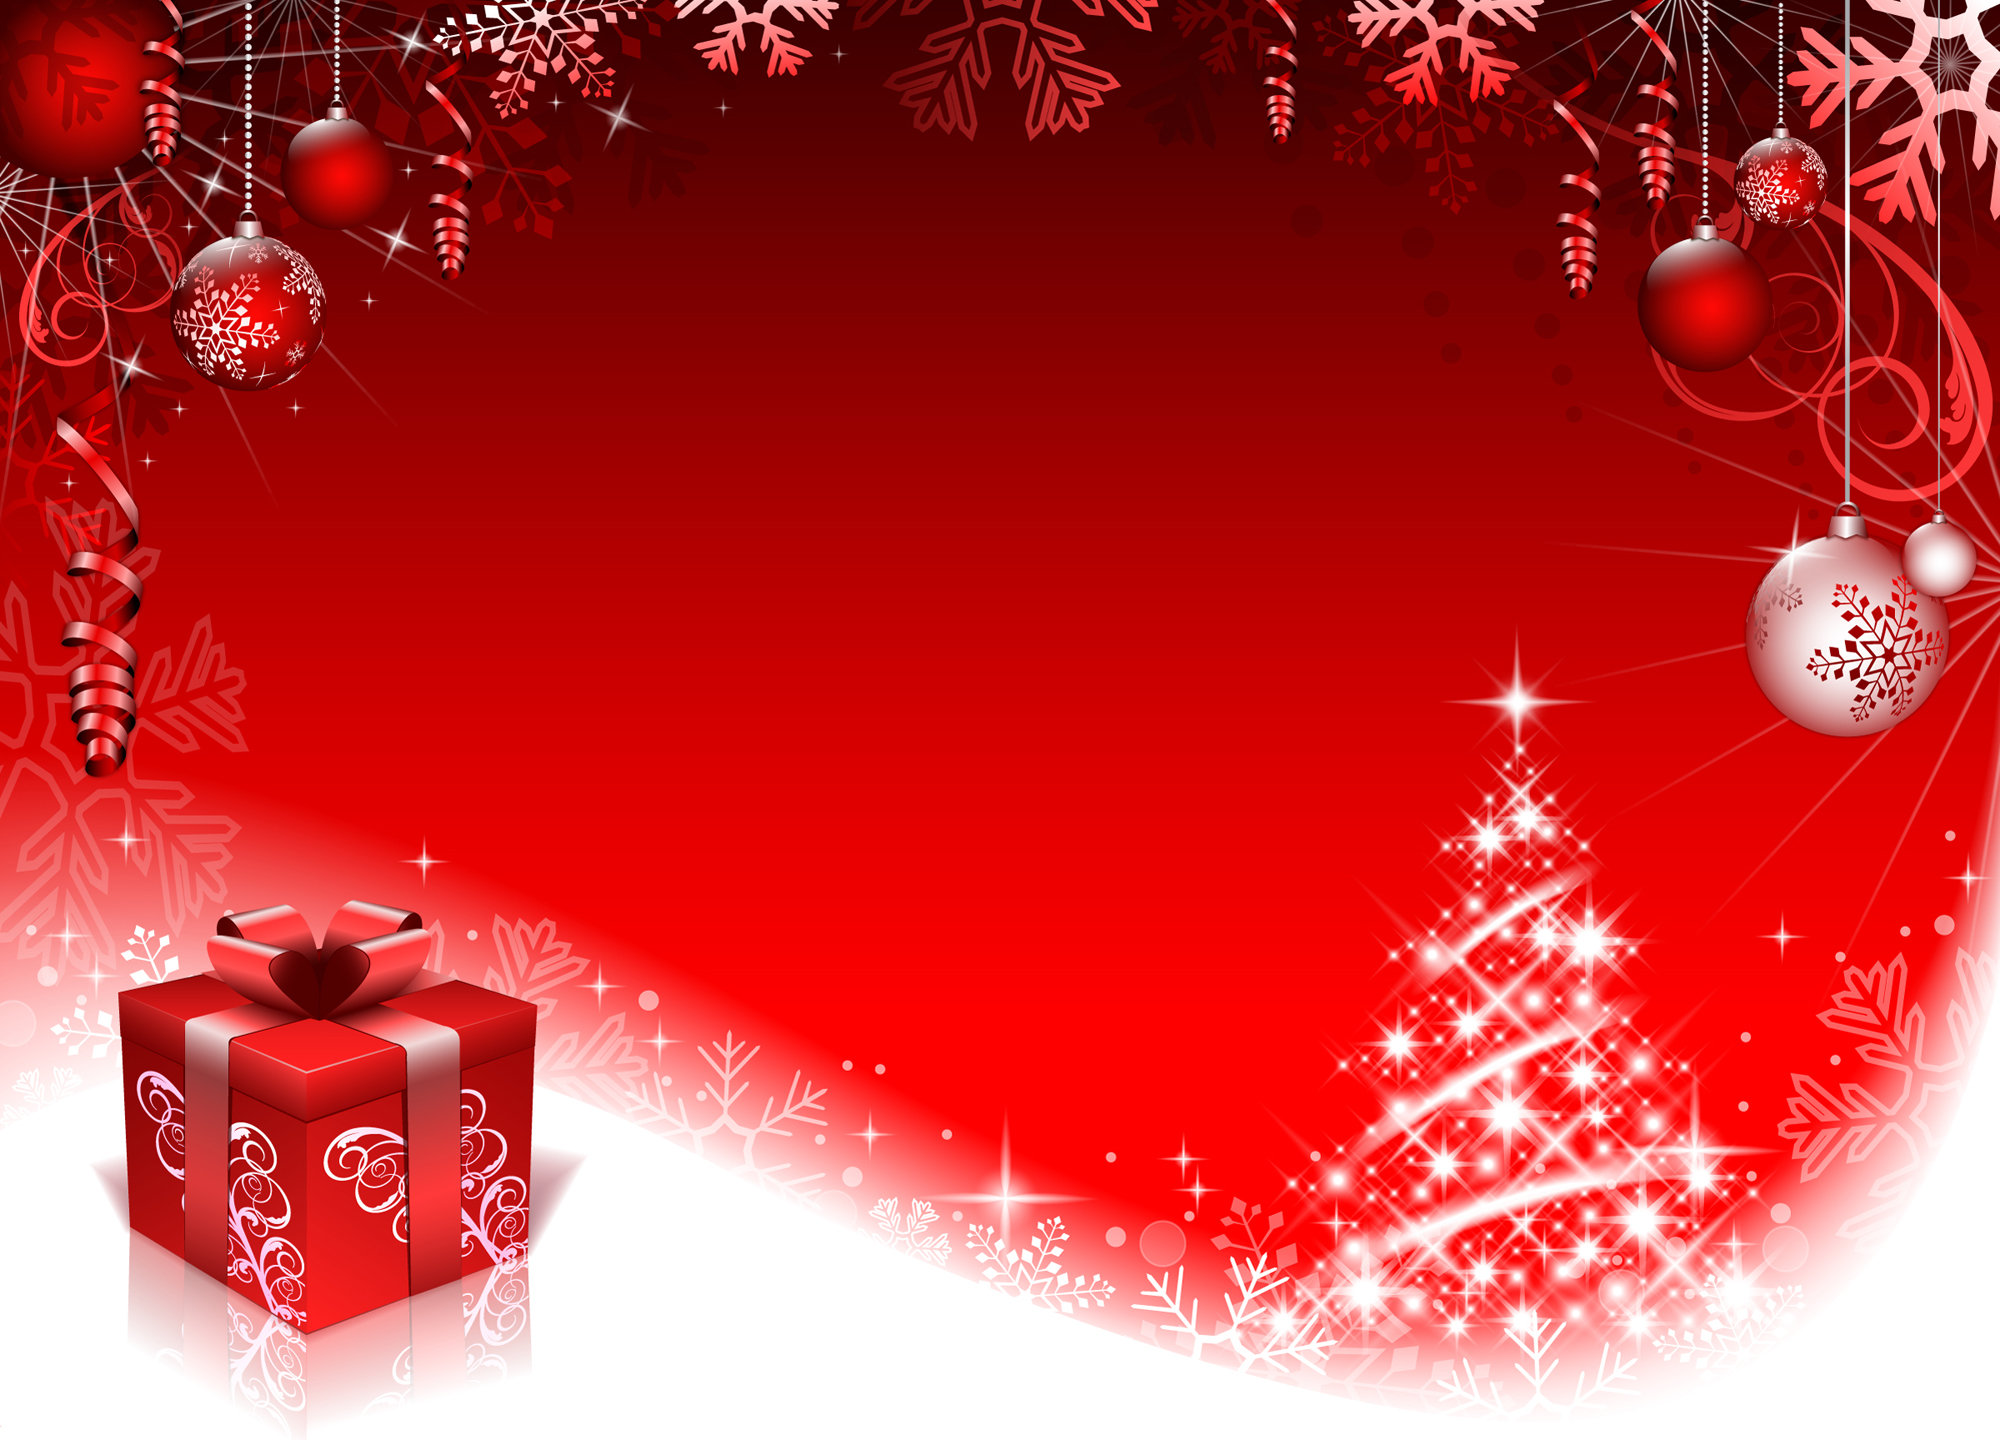 Christmas Background For Photoshop Wallpaper9